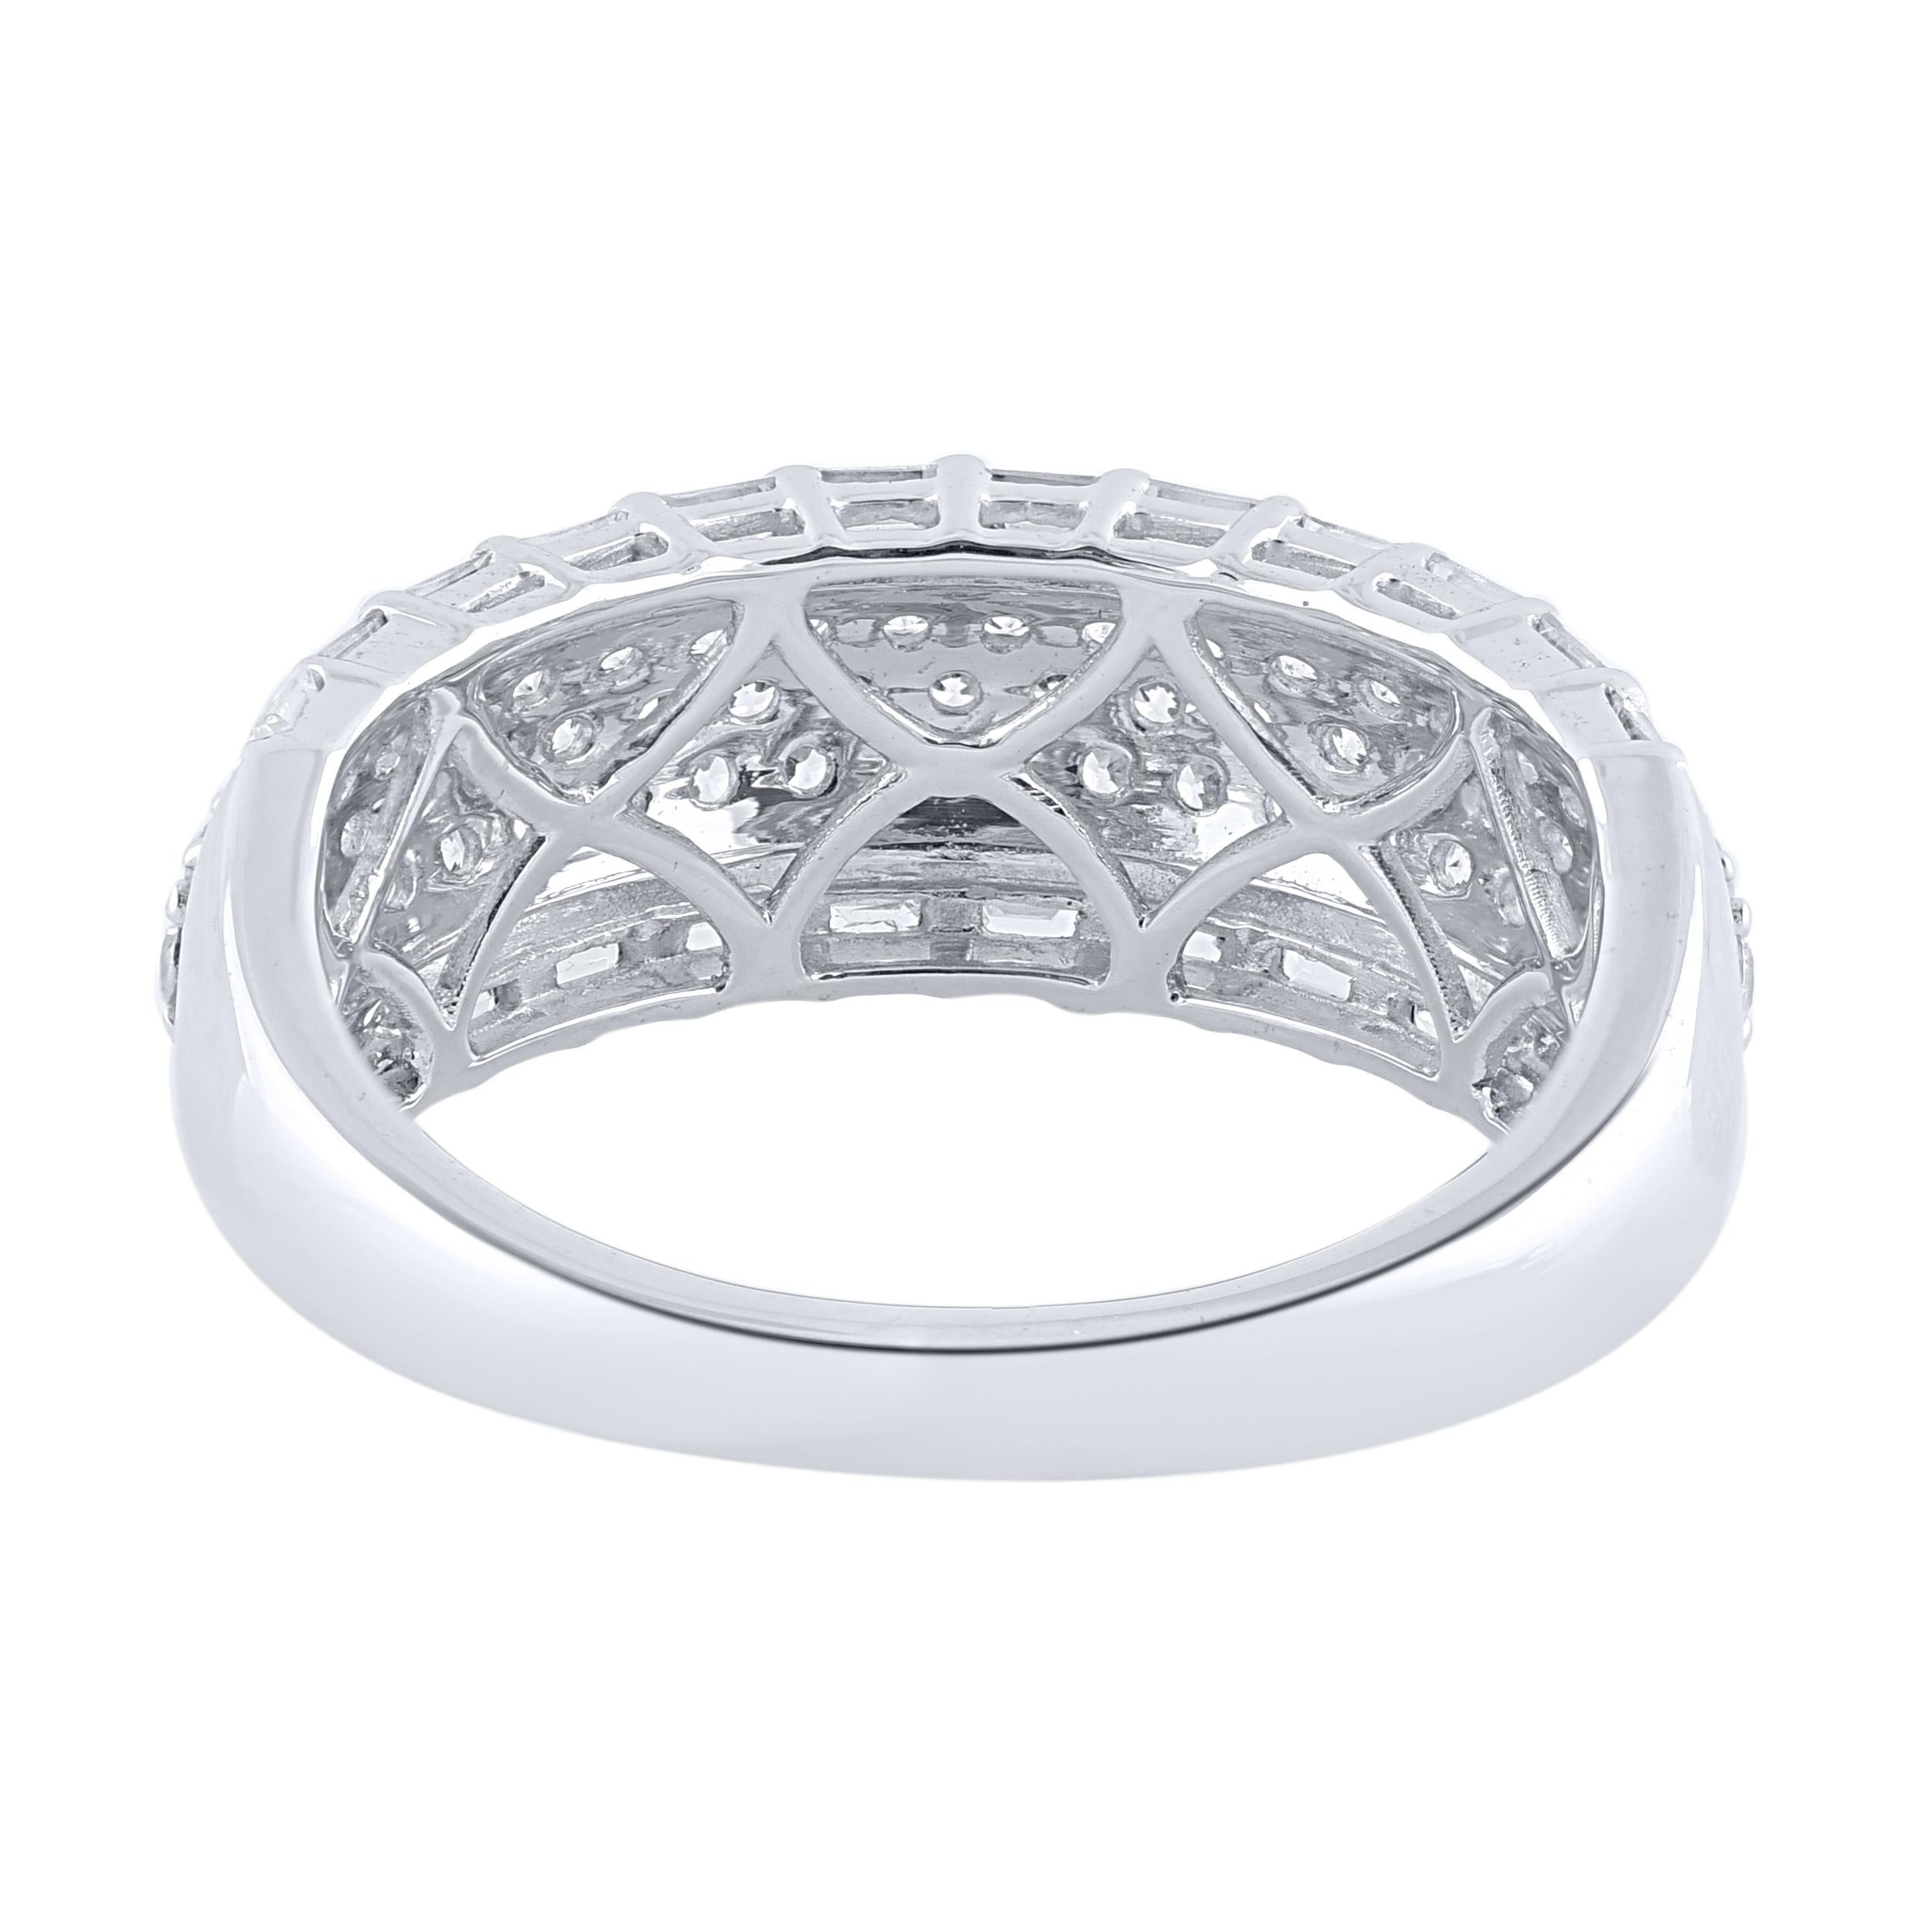 Truly exquisite, this diamond engagement band is sure to be admired for the inherent classic beauty and elegance within its design. These ring is crafted in 14KT white gold, and studded with 85 brilliant cut and baguette natural diamonds in pave &